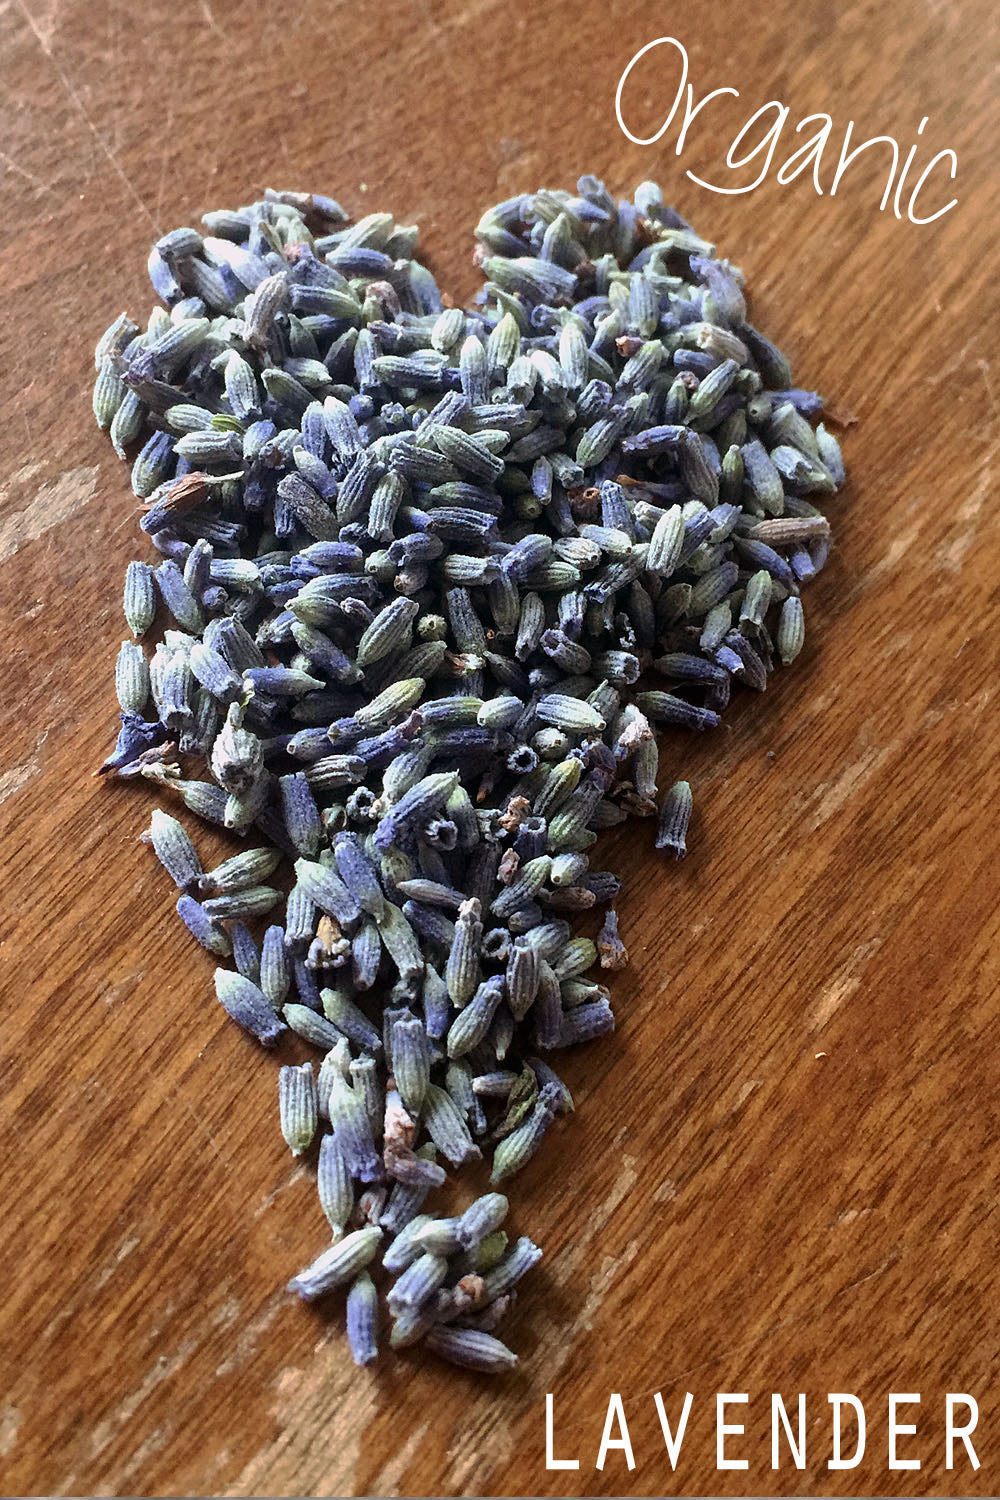 Lavender Wedding Confetti • Wedding Toss • Real Dry Flowers • Petal Confetti- Aisle Scatter - Lizzy Lane Farm Apothecary